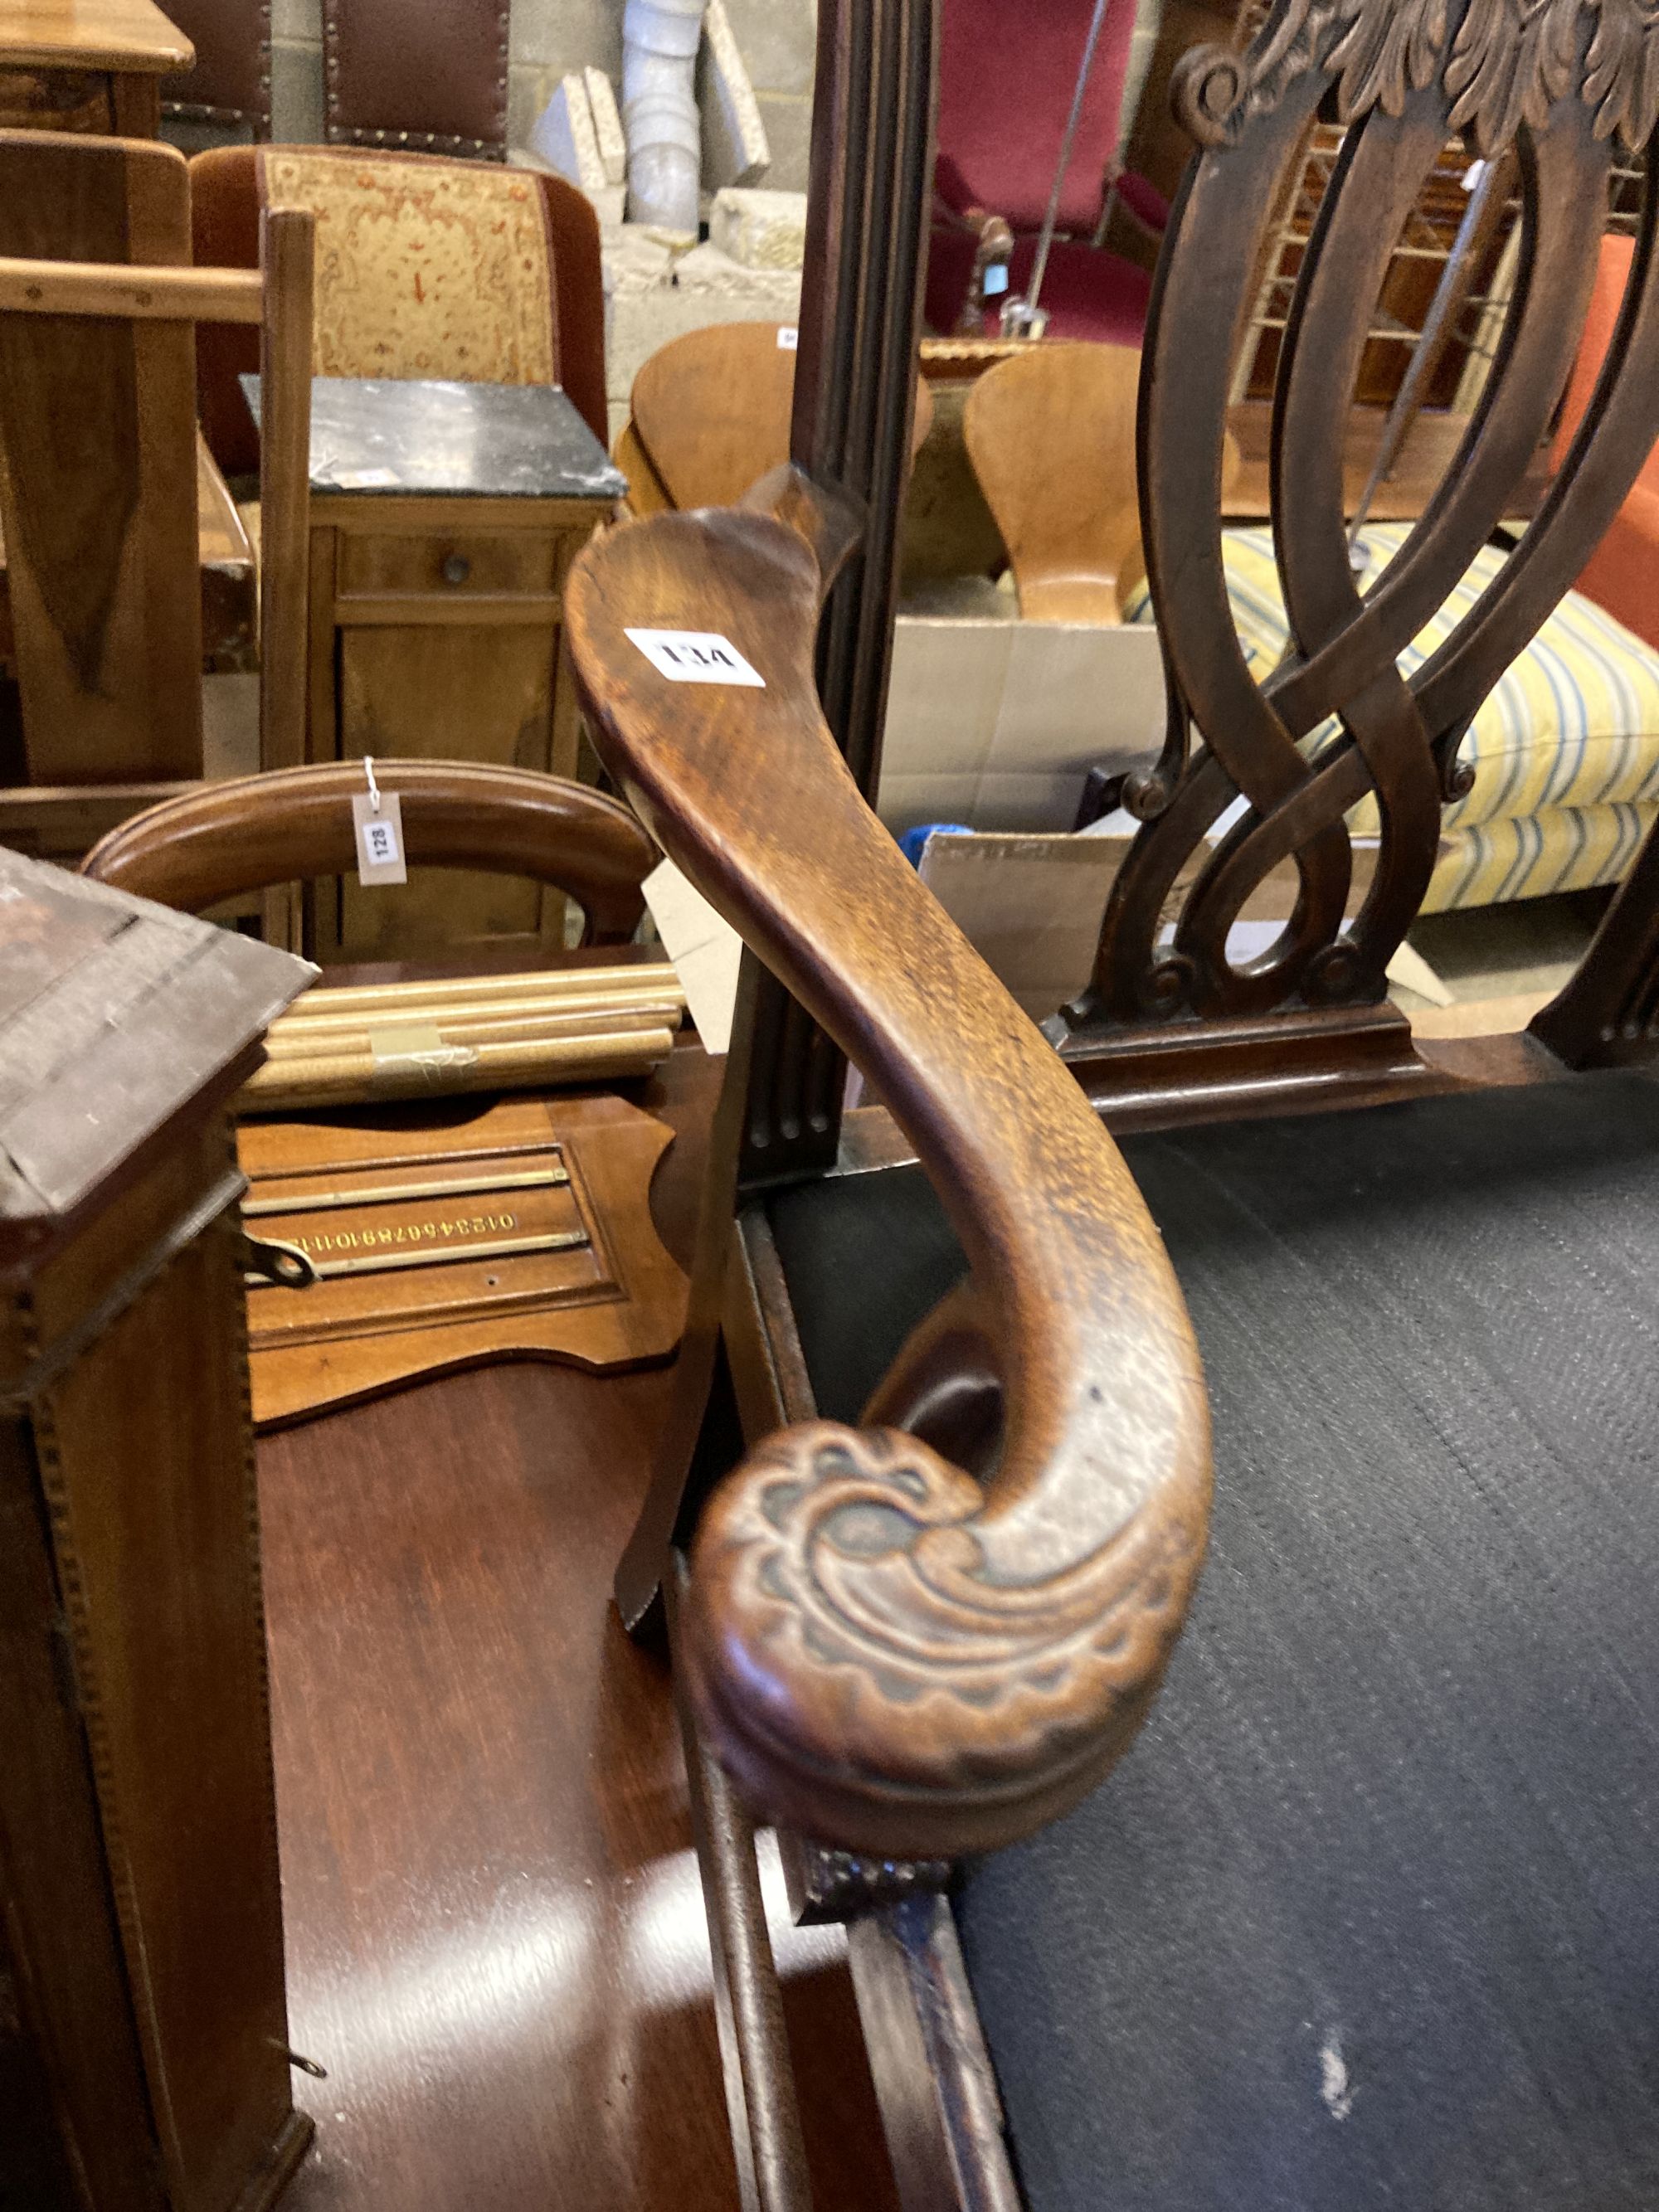 A George III mahogany elbow chair with horsehair drop in seat, width 76cm, depth 50cm, height 93cm